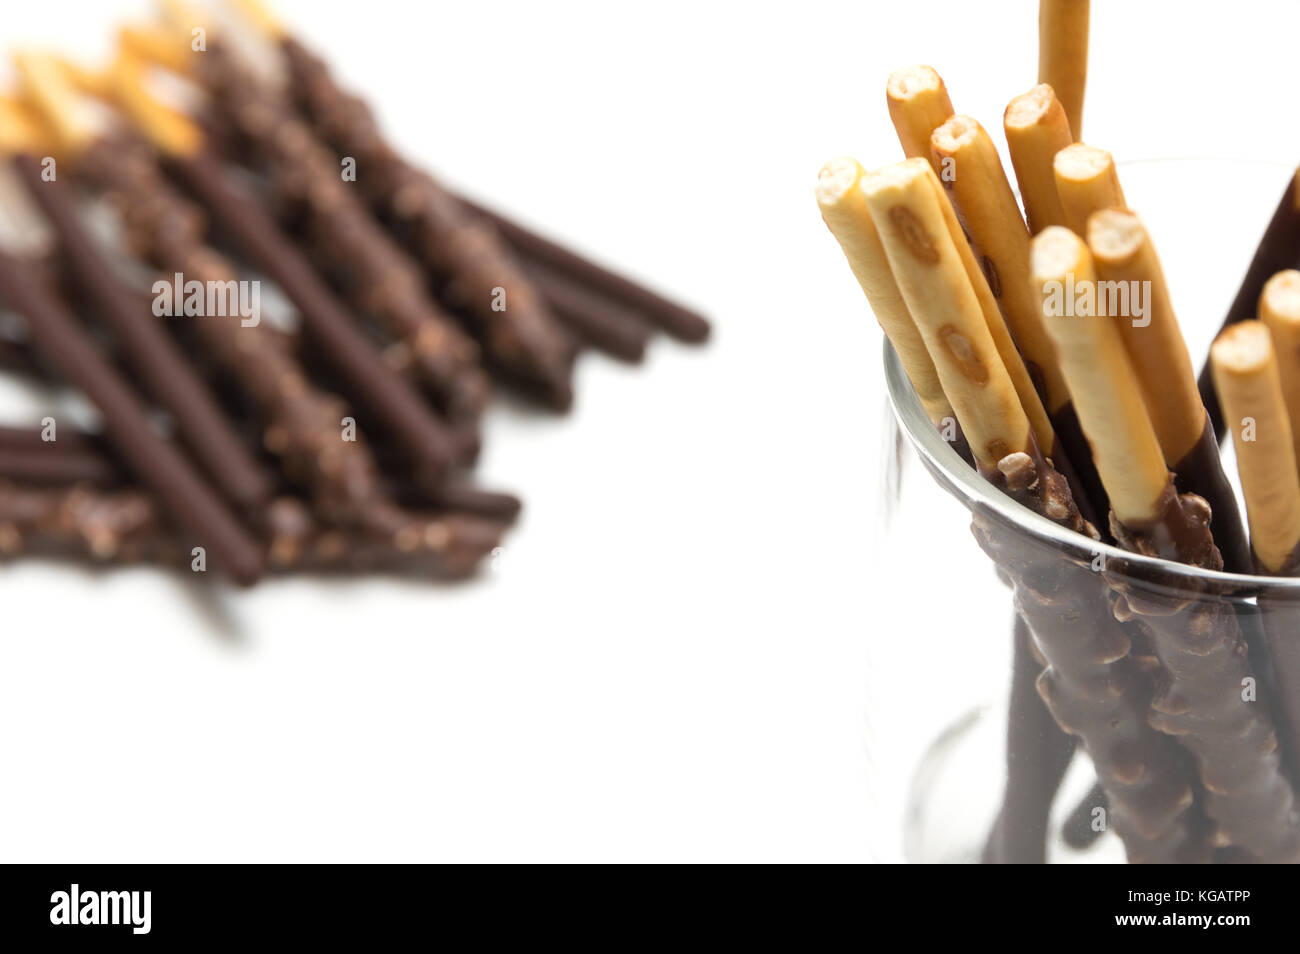 Chocolate Filled Biscuit Sticks on White Background Stock Photo